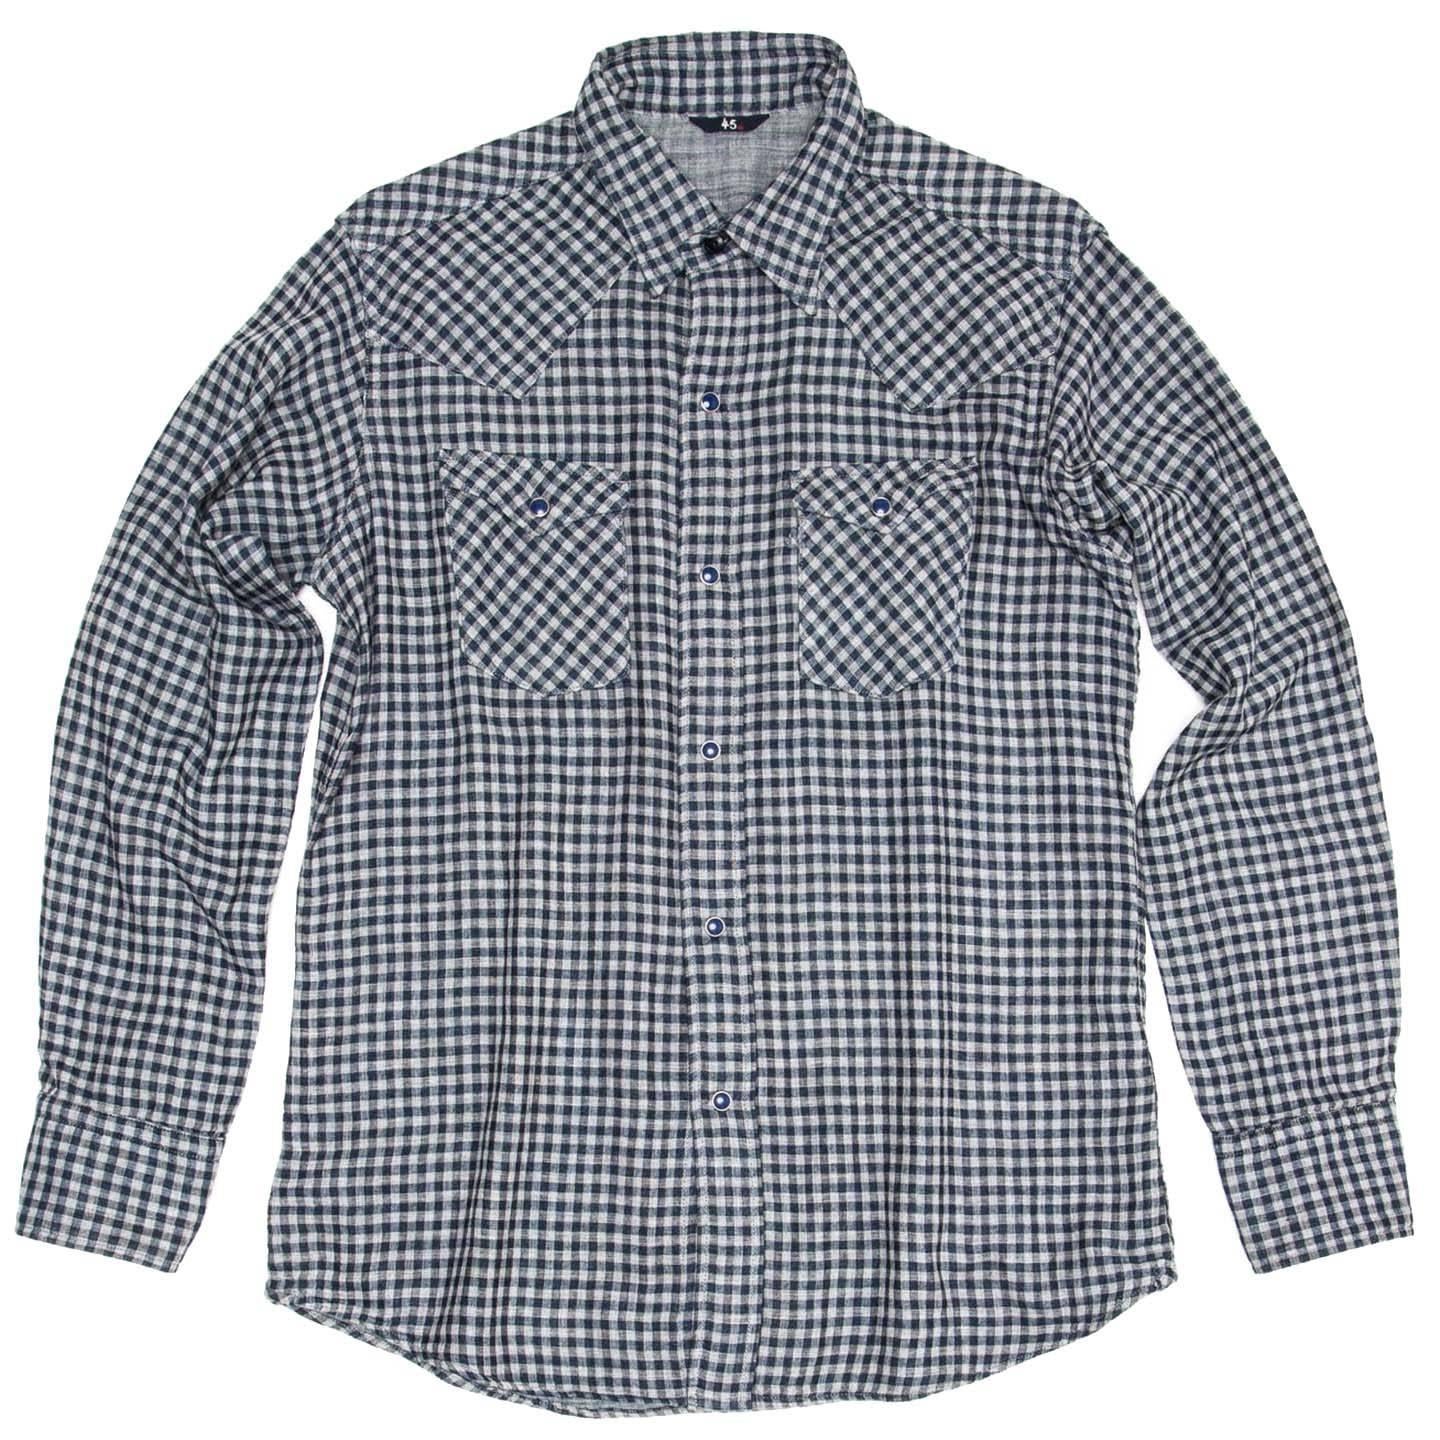 Fitted indigo and grey gingham soft cotton shirt with spread pointed collar with blue stone and metal snap buttons. The shirt has a western flair thanks to the shaped yoke at back and front. Two patch pockets with shaped flaps close with the same